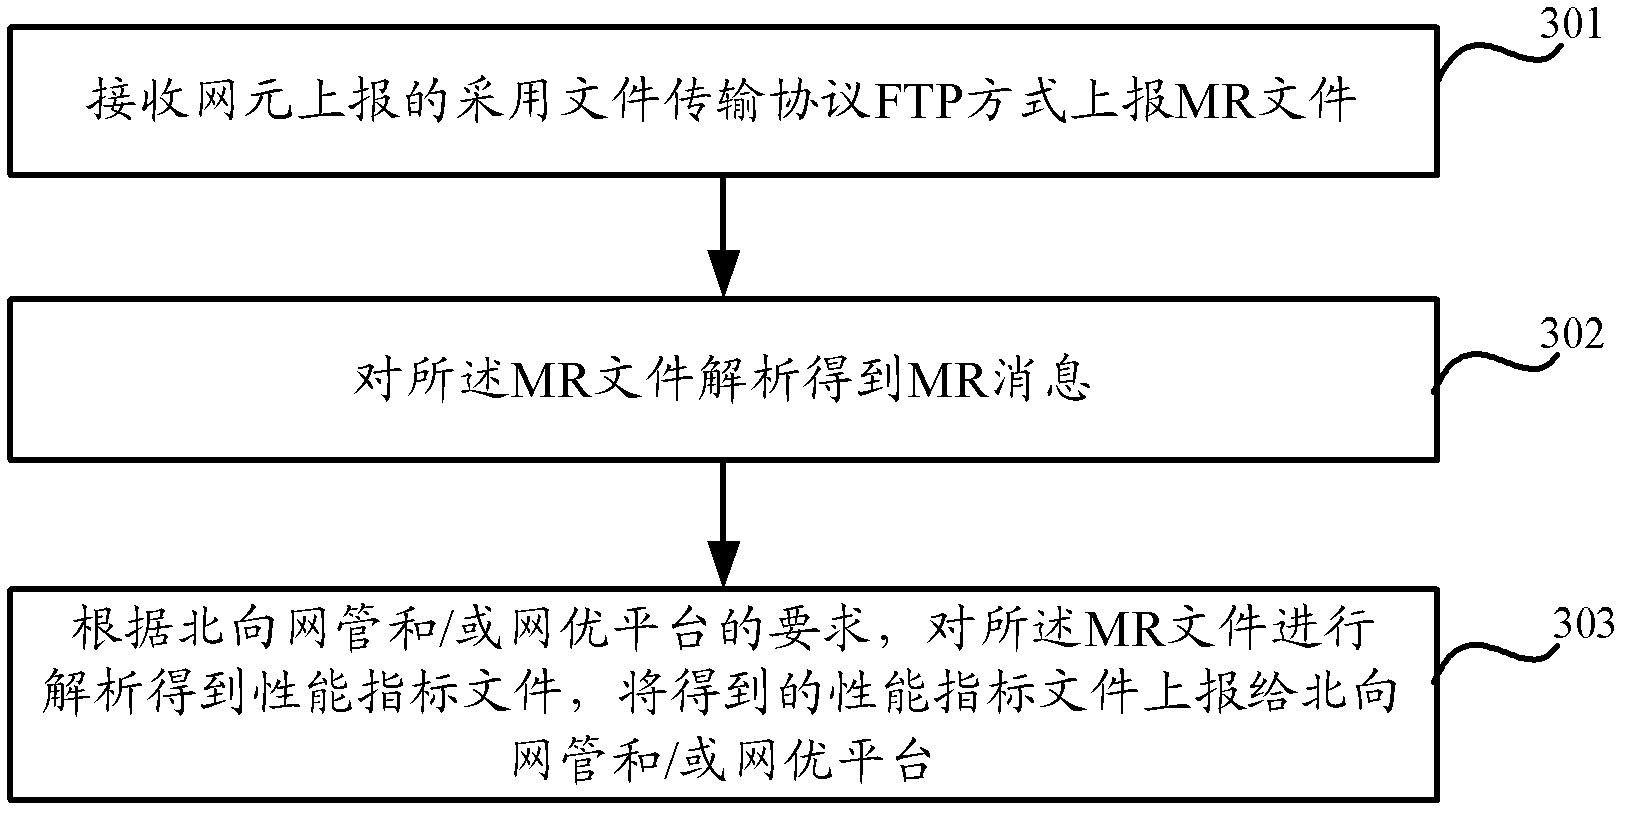 Network element and method for uploading MR (Measure Report) messages by network element